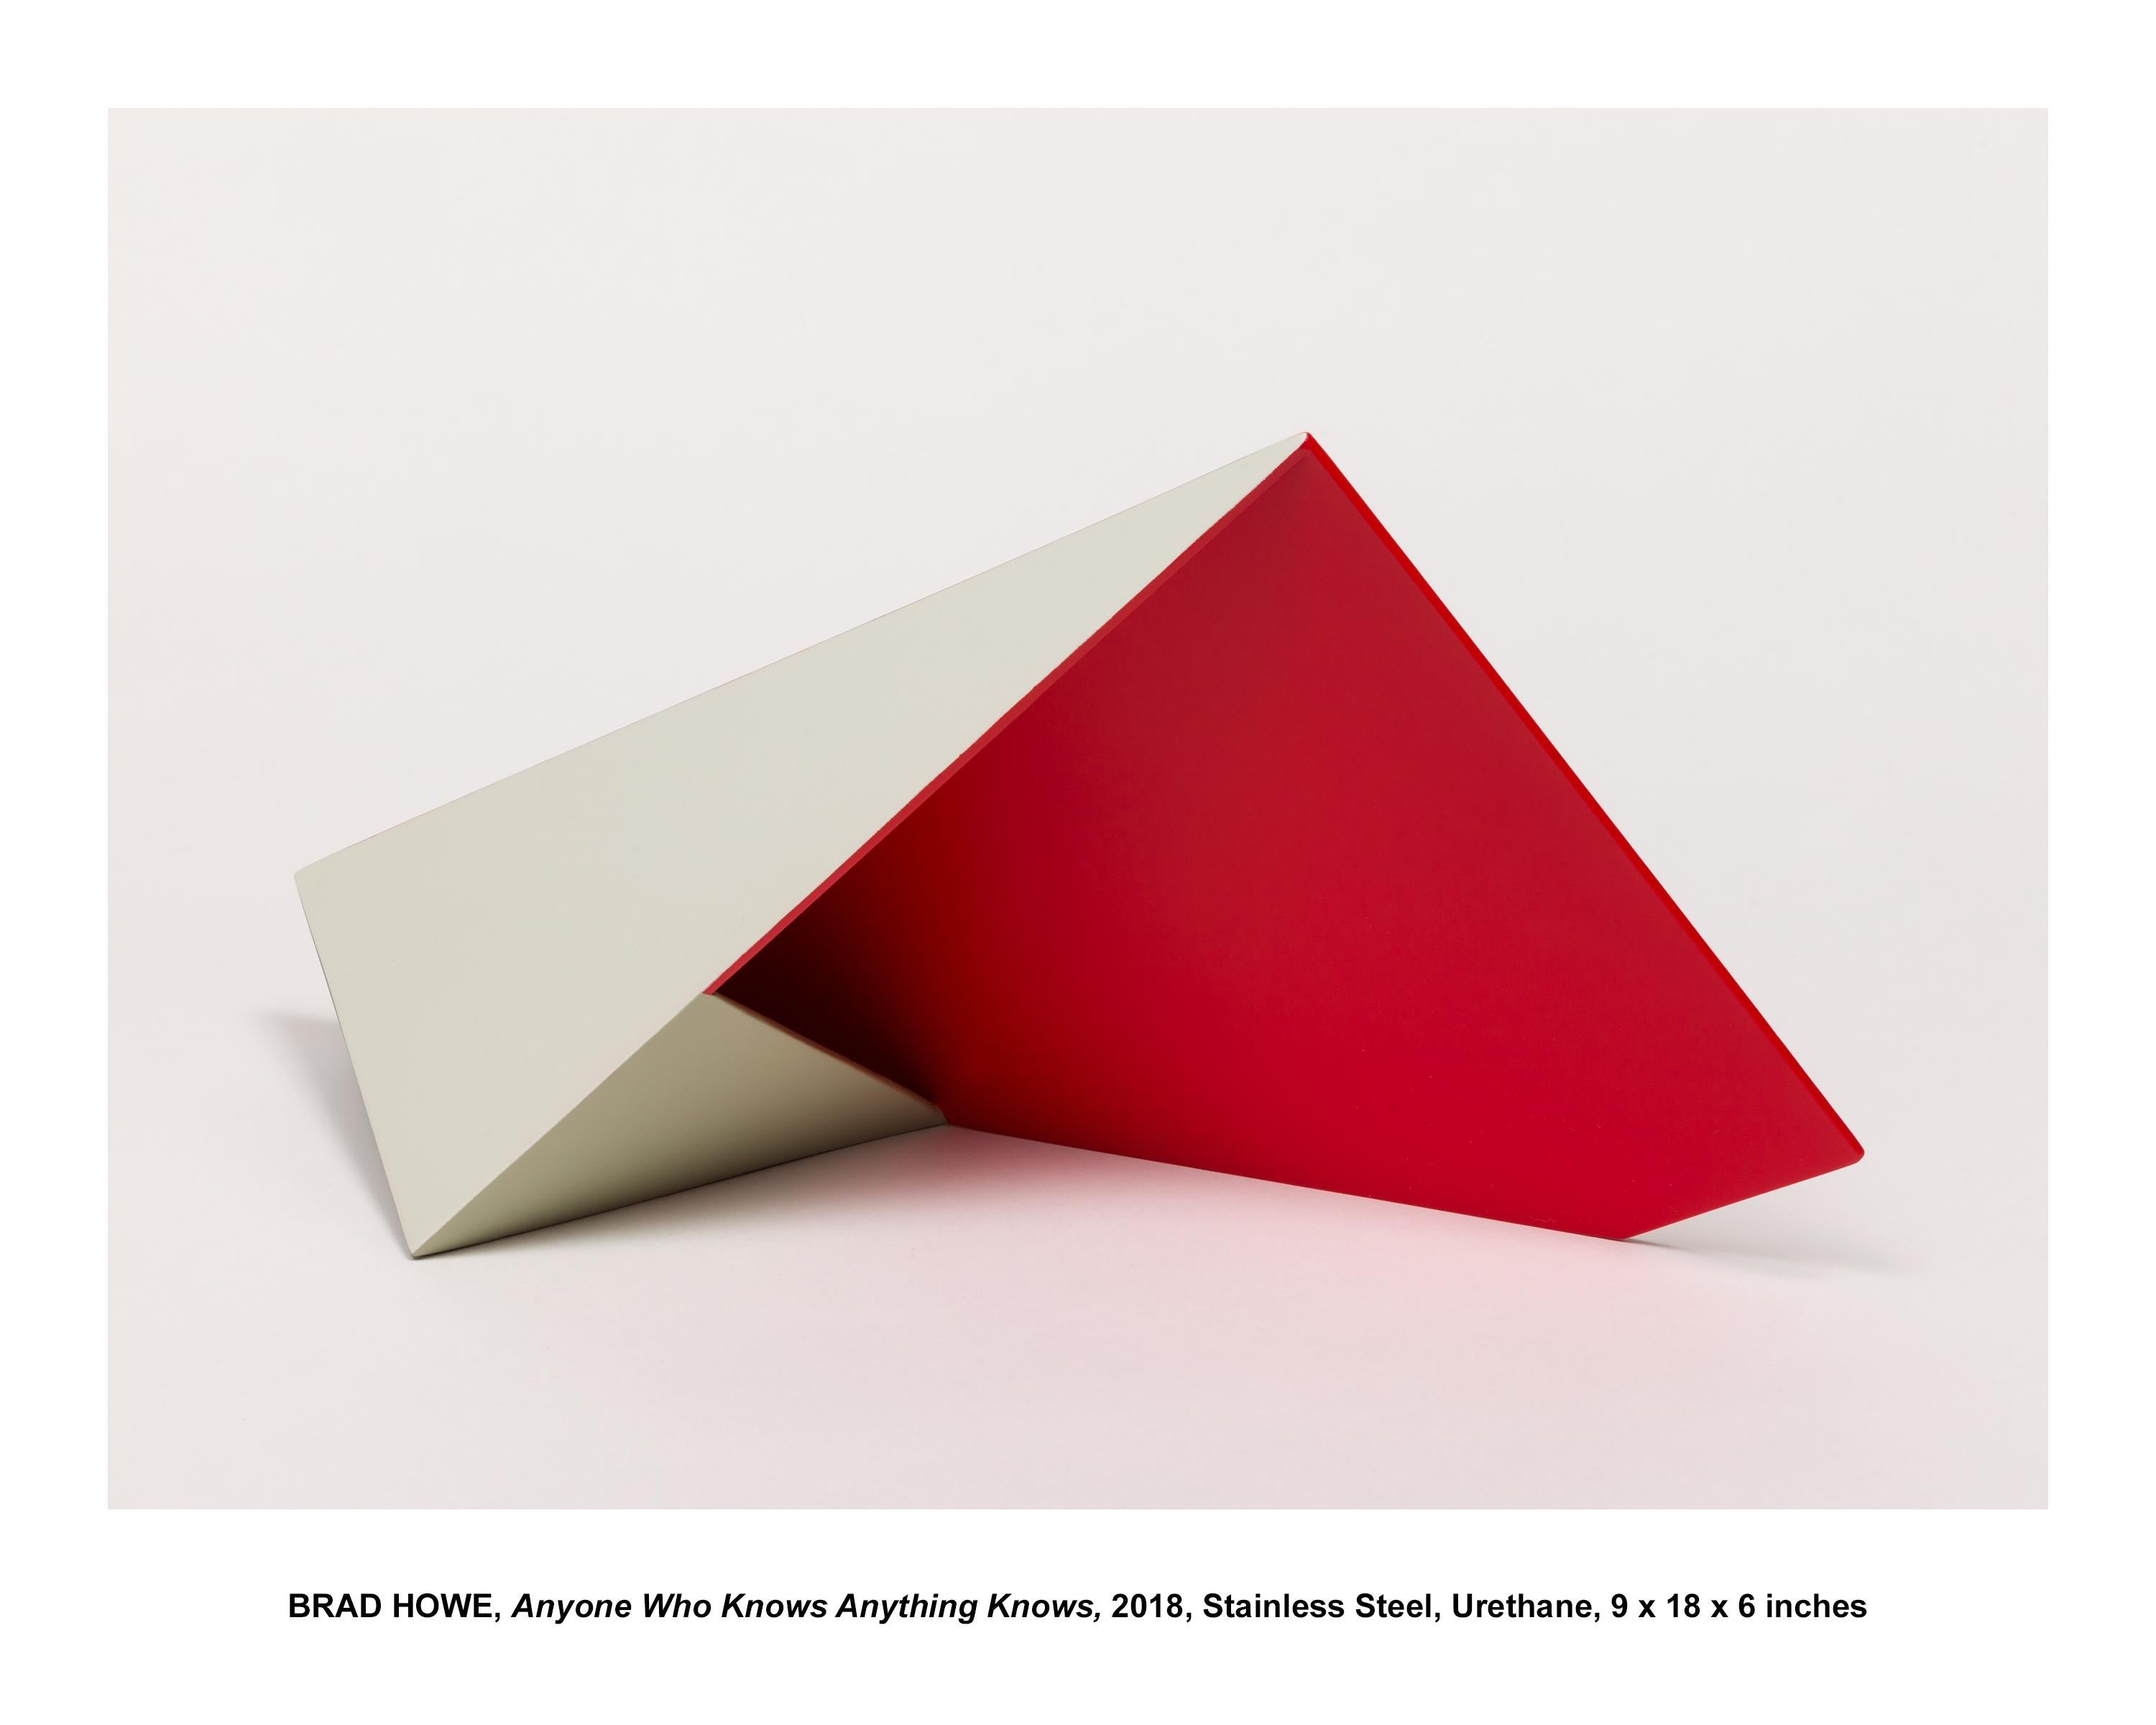 Brad Howe Abstract Sculpture - Anyone Who Knows Anything Knows, Contemporary, Geometric, Minimal, Sculpture